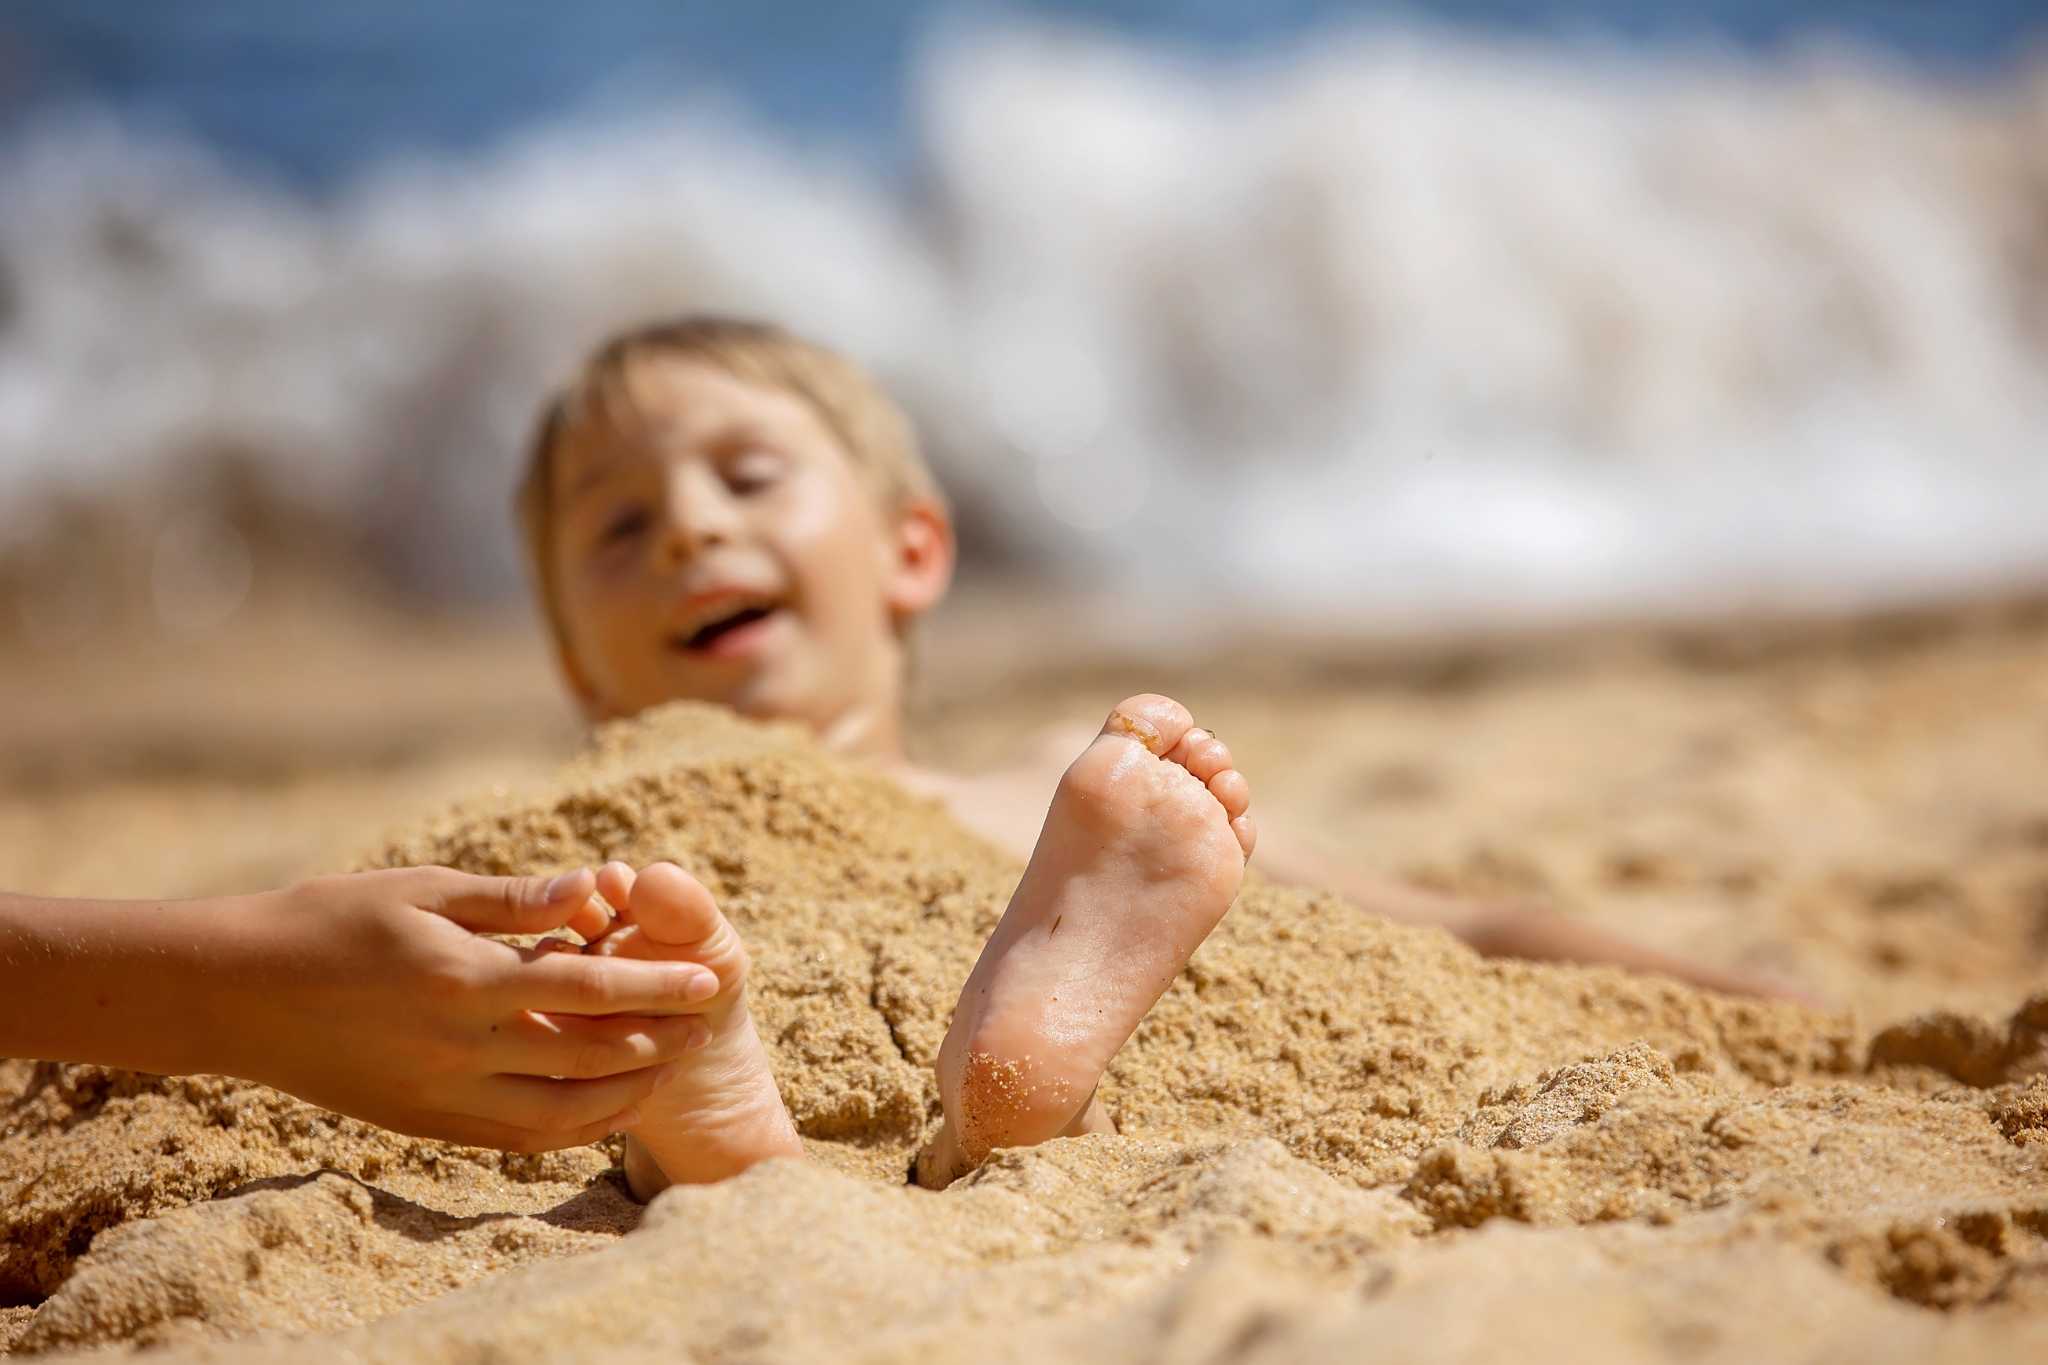 Child, touching sibling on the beach on the feet with feather, kid cover in sand, smiling, laughing